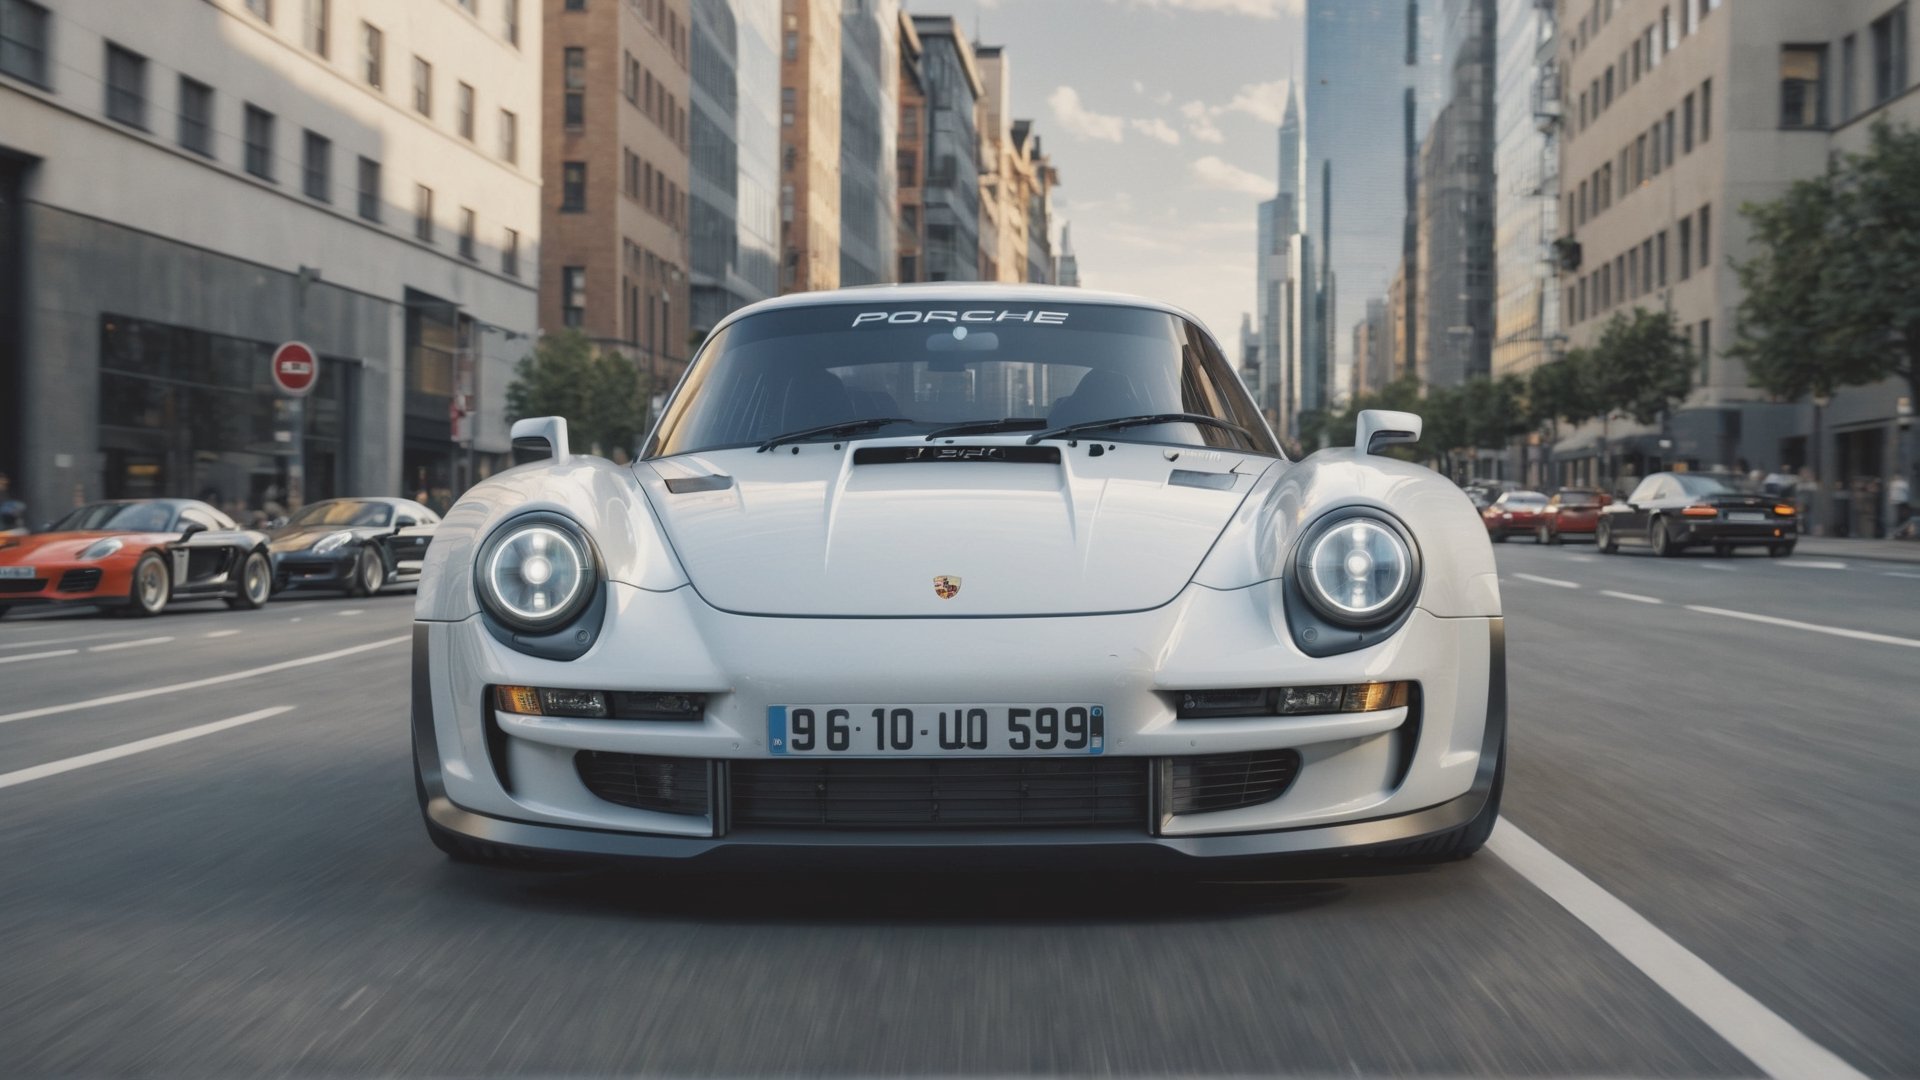 A futuristic hi-tech Rally Car inspired by Porsche 959, on the road in city area background, parked, front view, symmetrical,